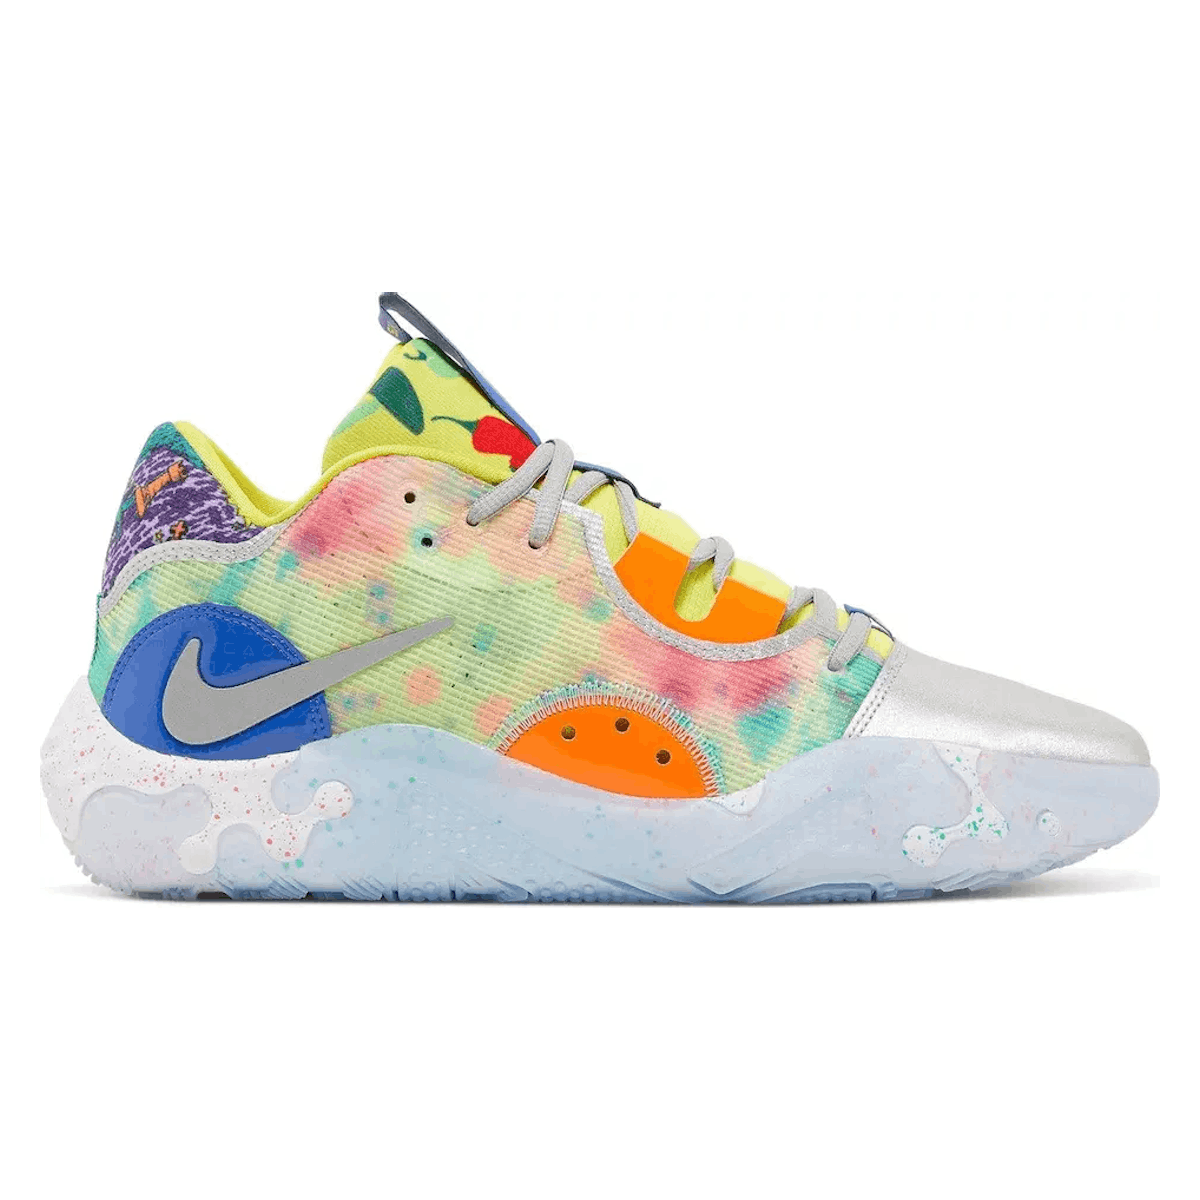 Nike PG 6 "What The"